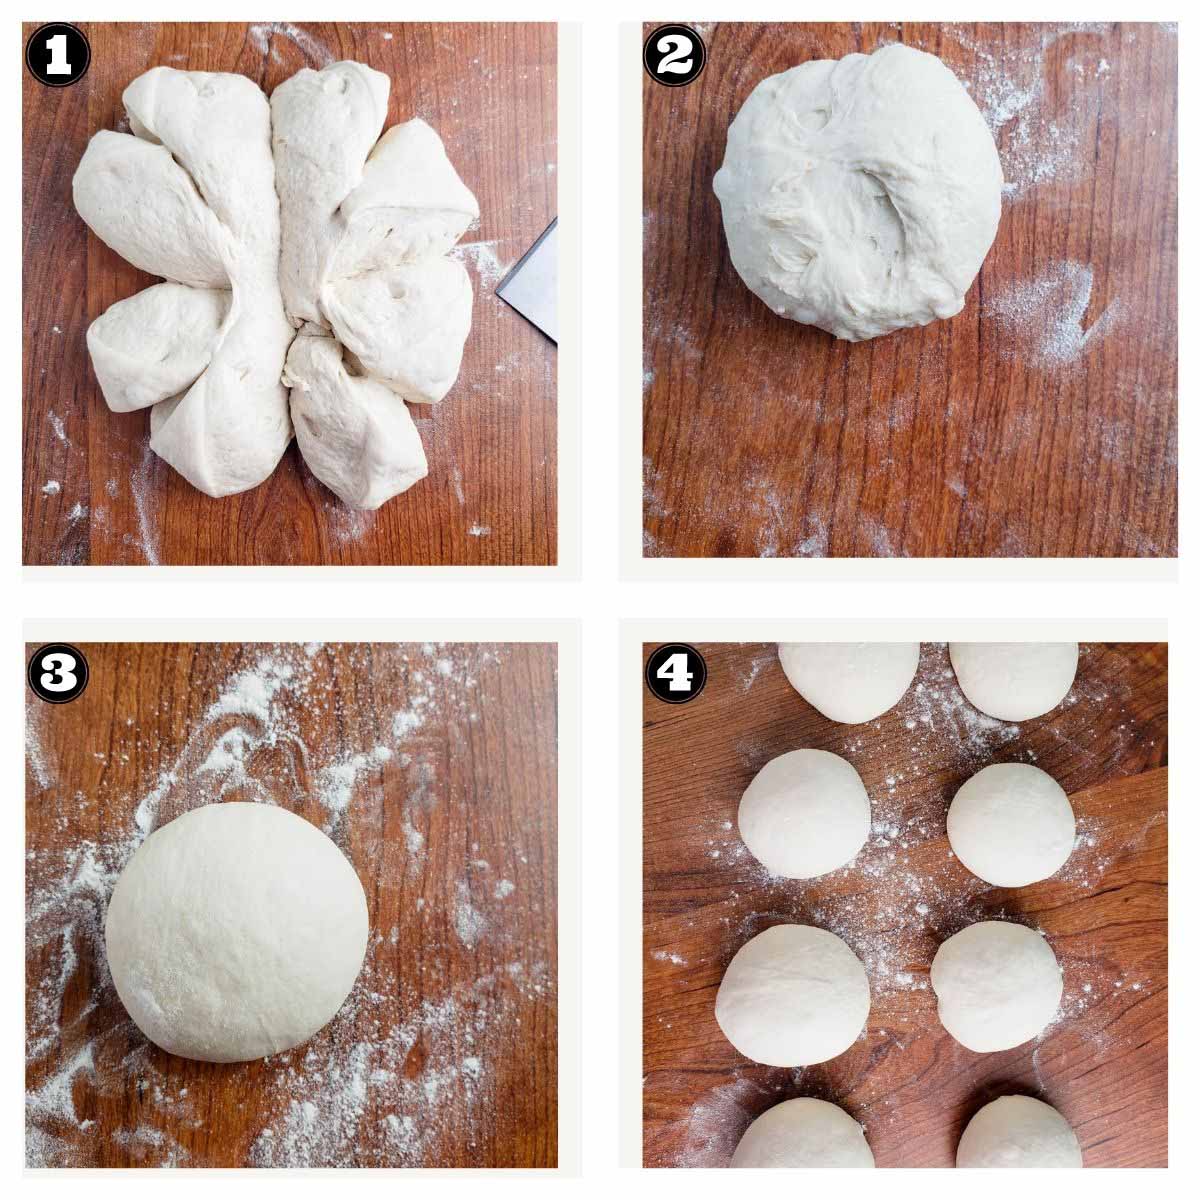 images showing dividing the dough into 8 equal dough pieces and then shaping them into rounds.